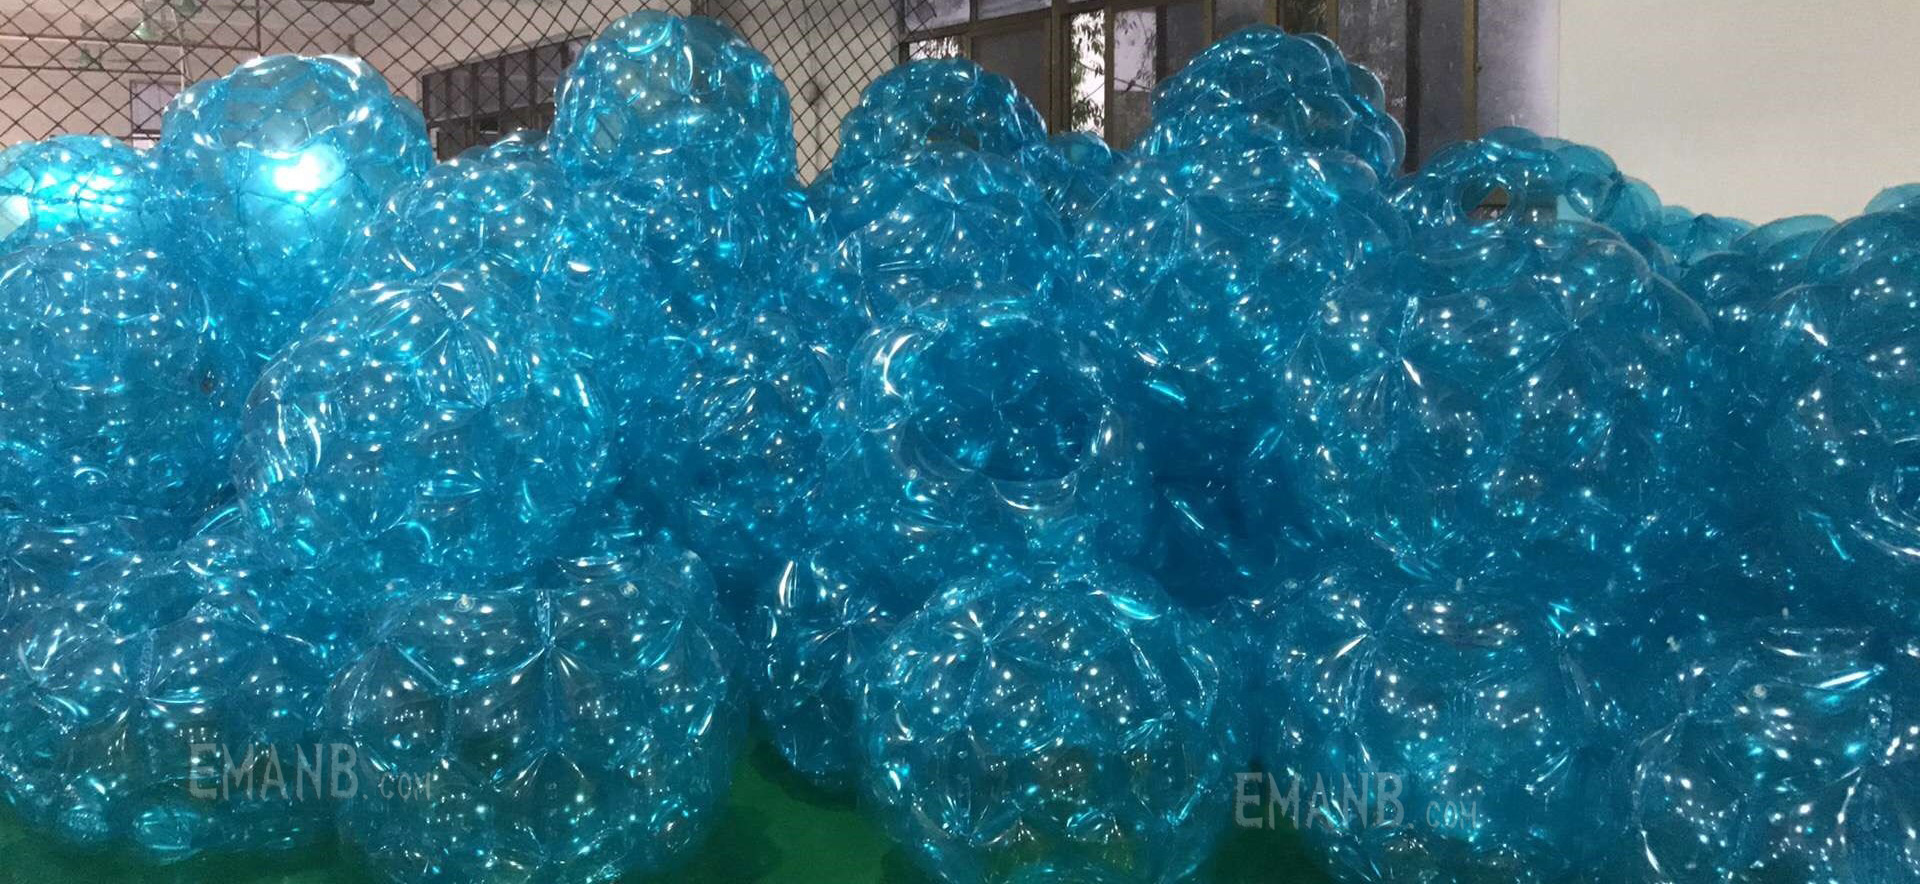 inflatable bumper ball, inflatable ball, inflatable zorb, inflatable ball